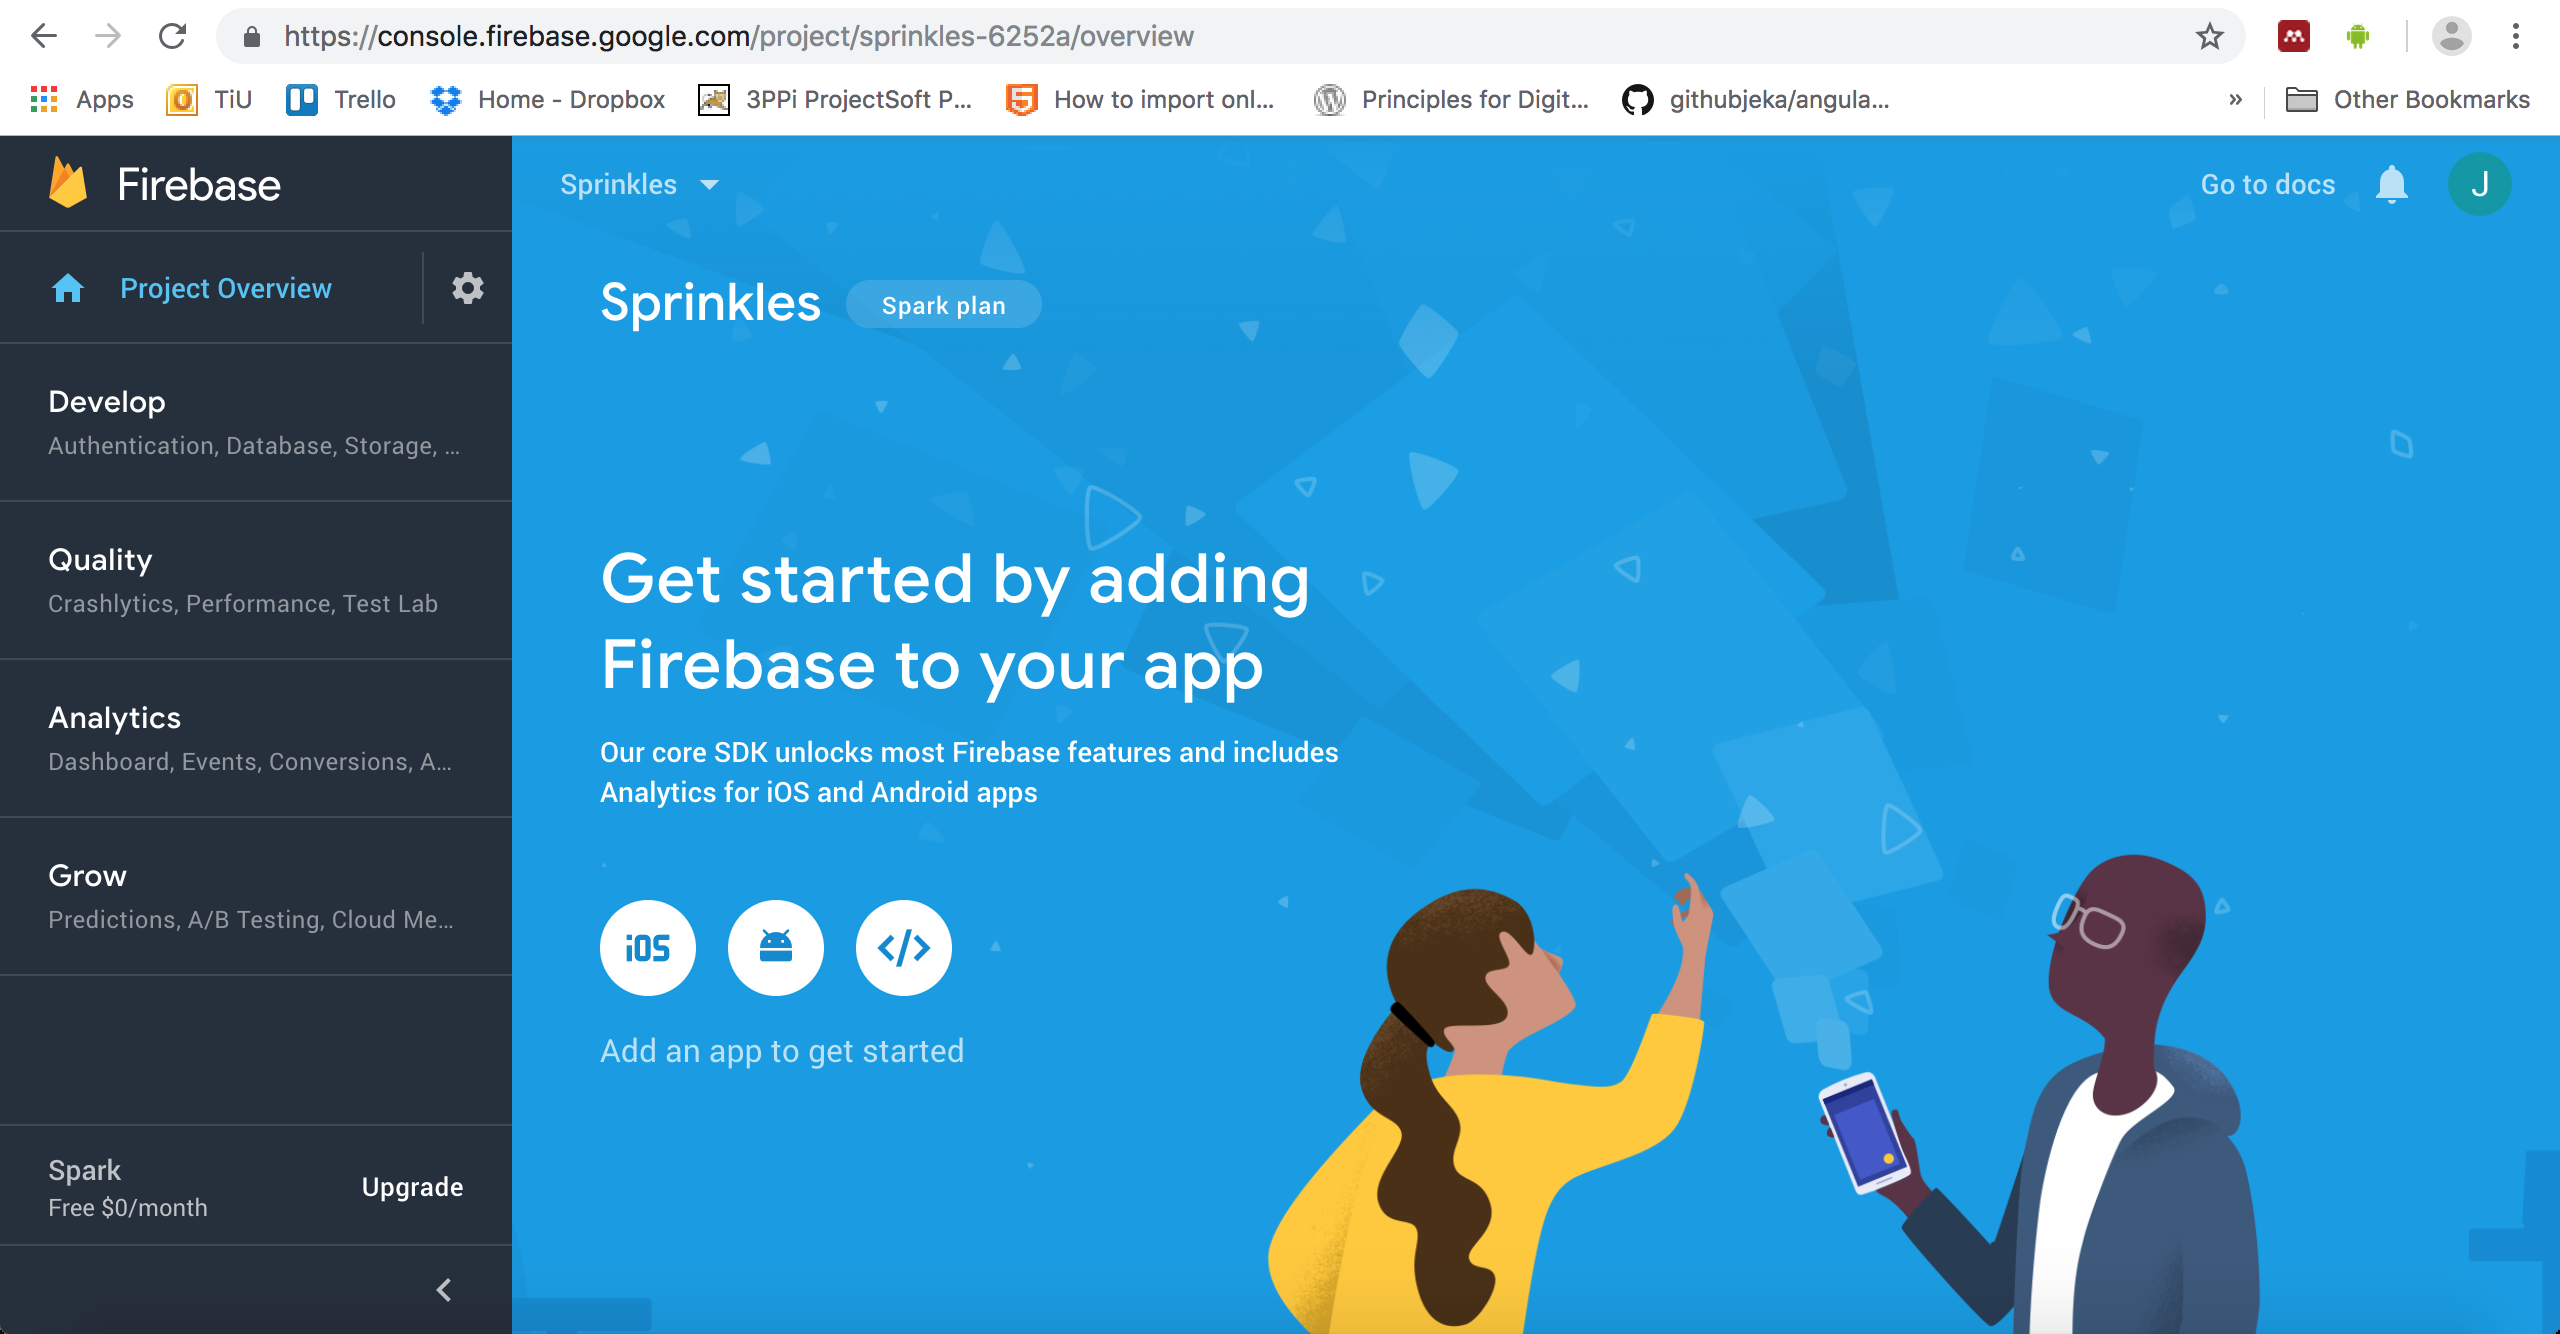 Overview of our Firebase project